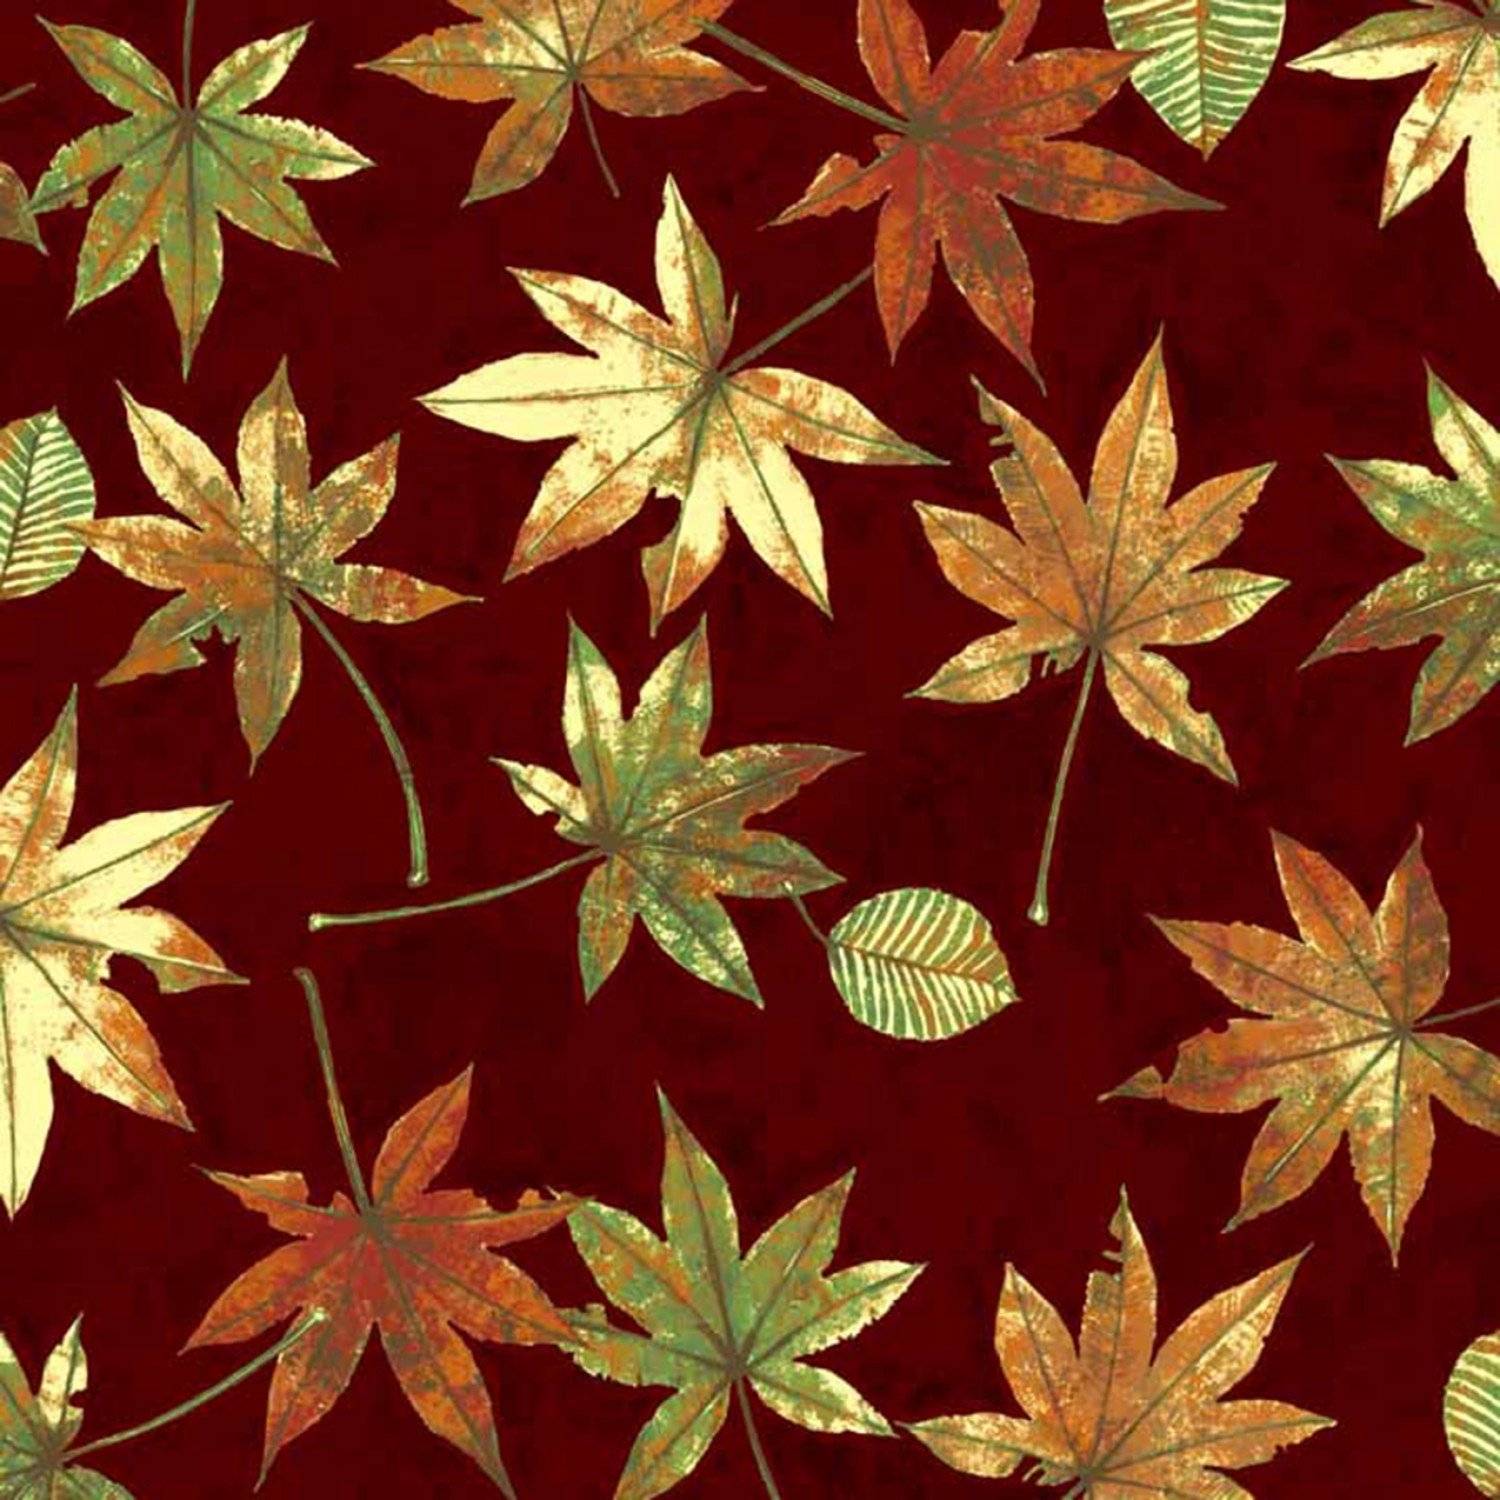 Shades of Autumn by Norman Wyatt Jr. for P&B Textiles